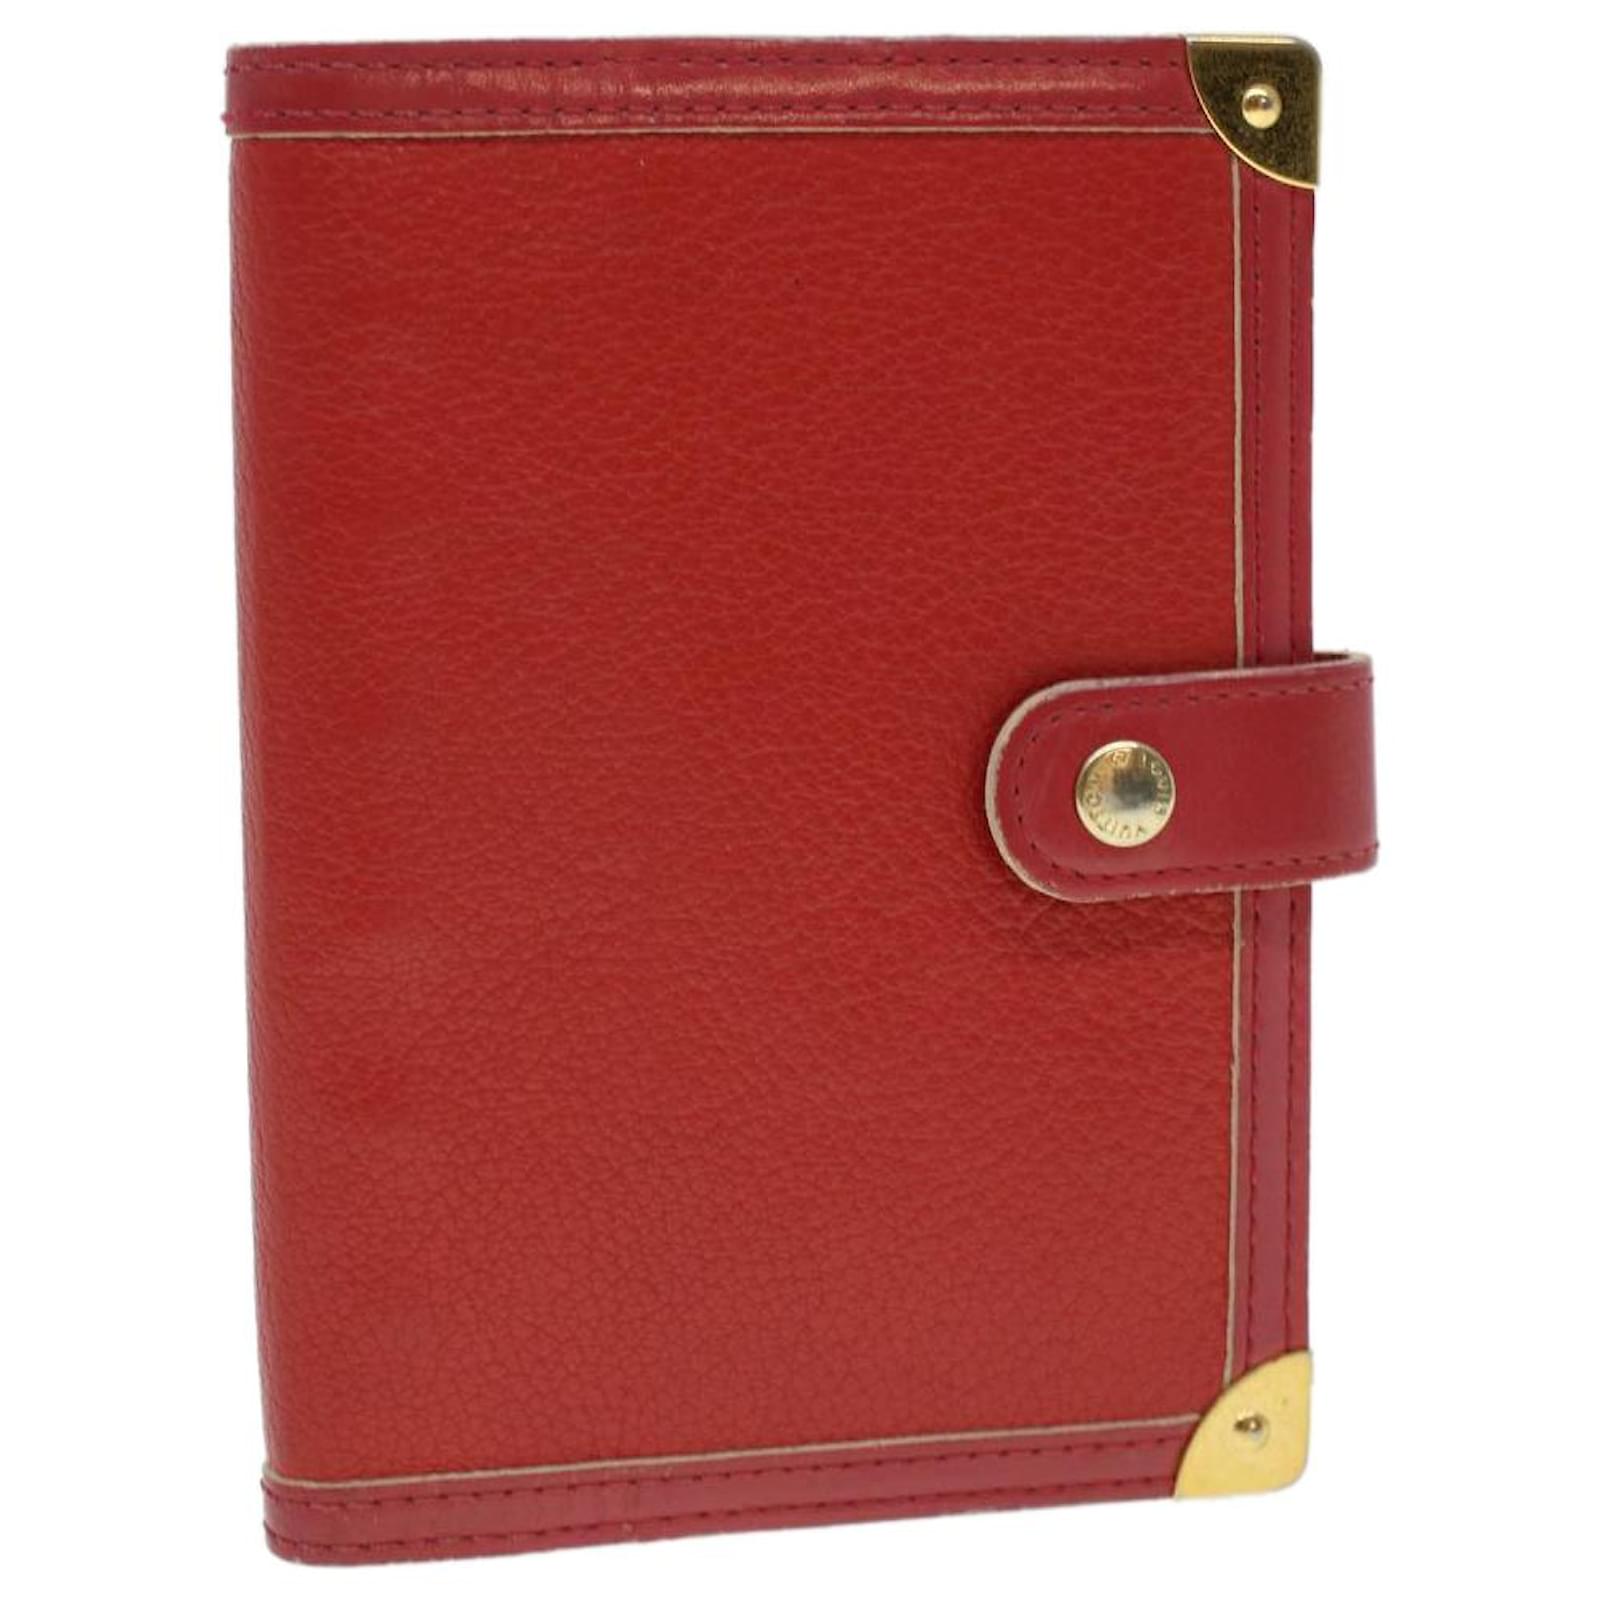 LOUIS VUITTON Agenda PM Day Planner Cover My LV Red White R20005